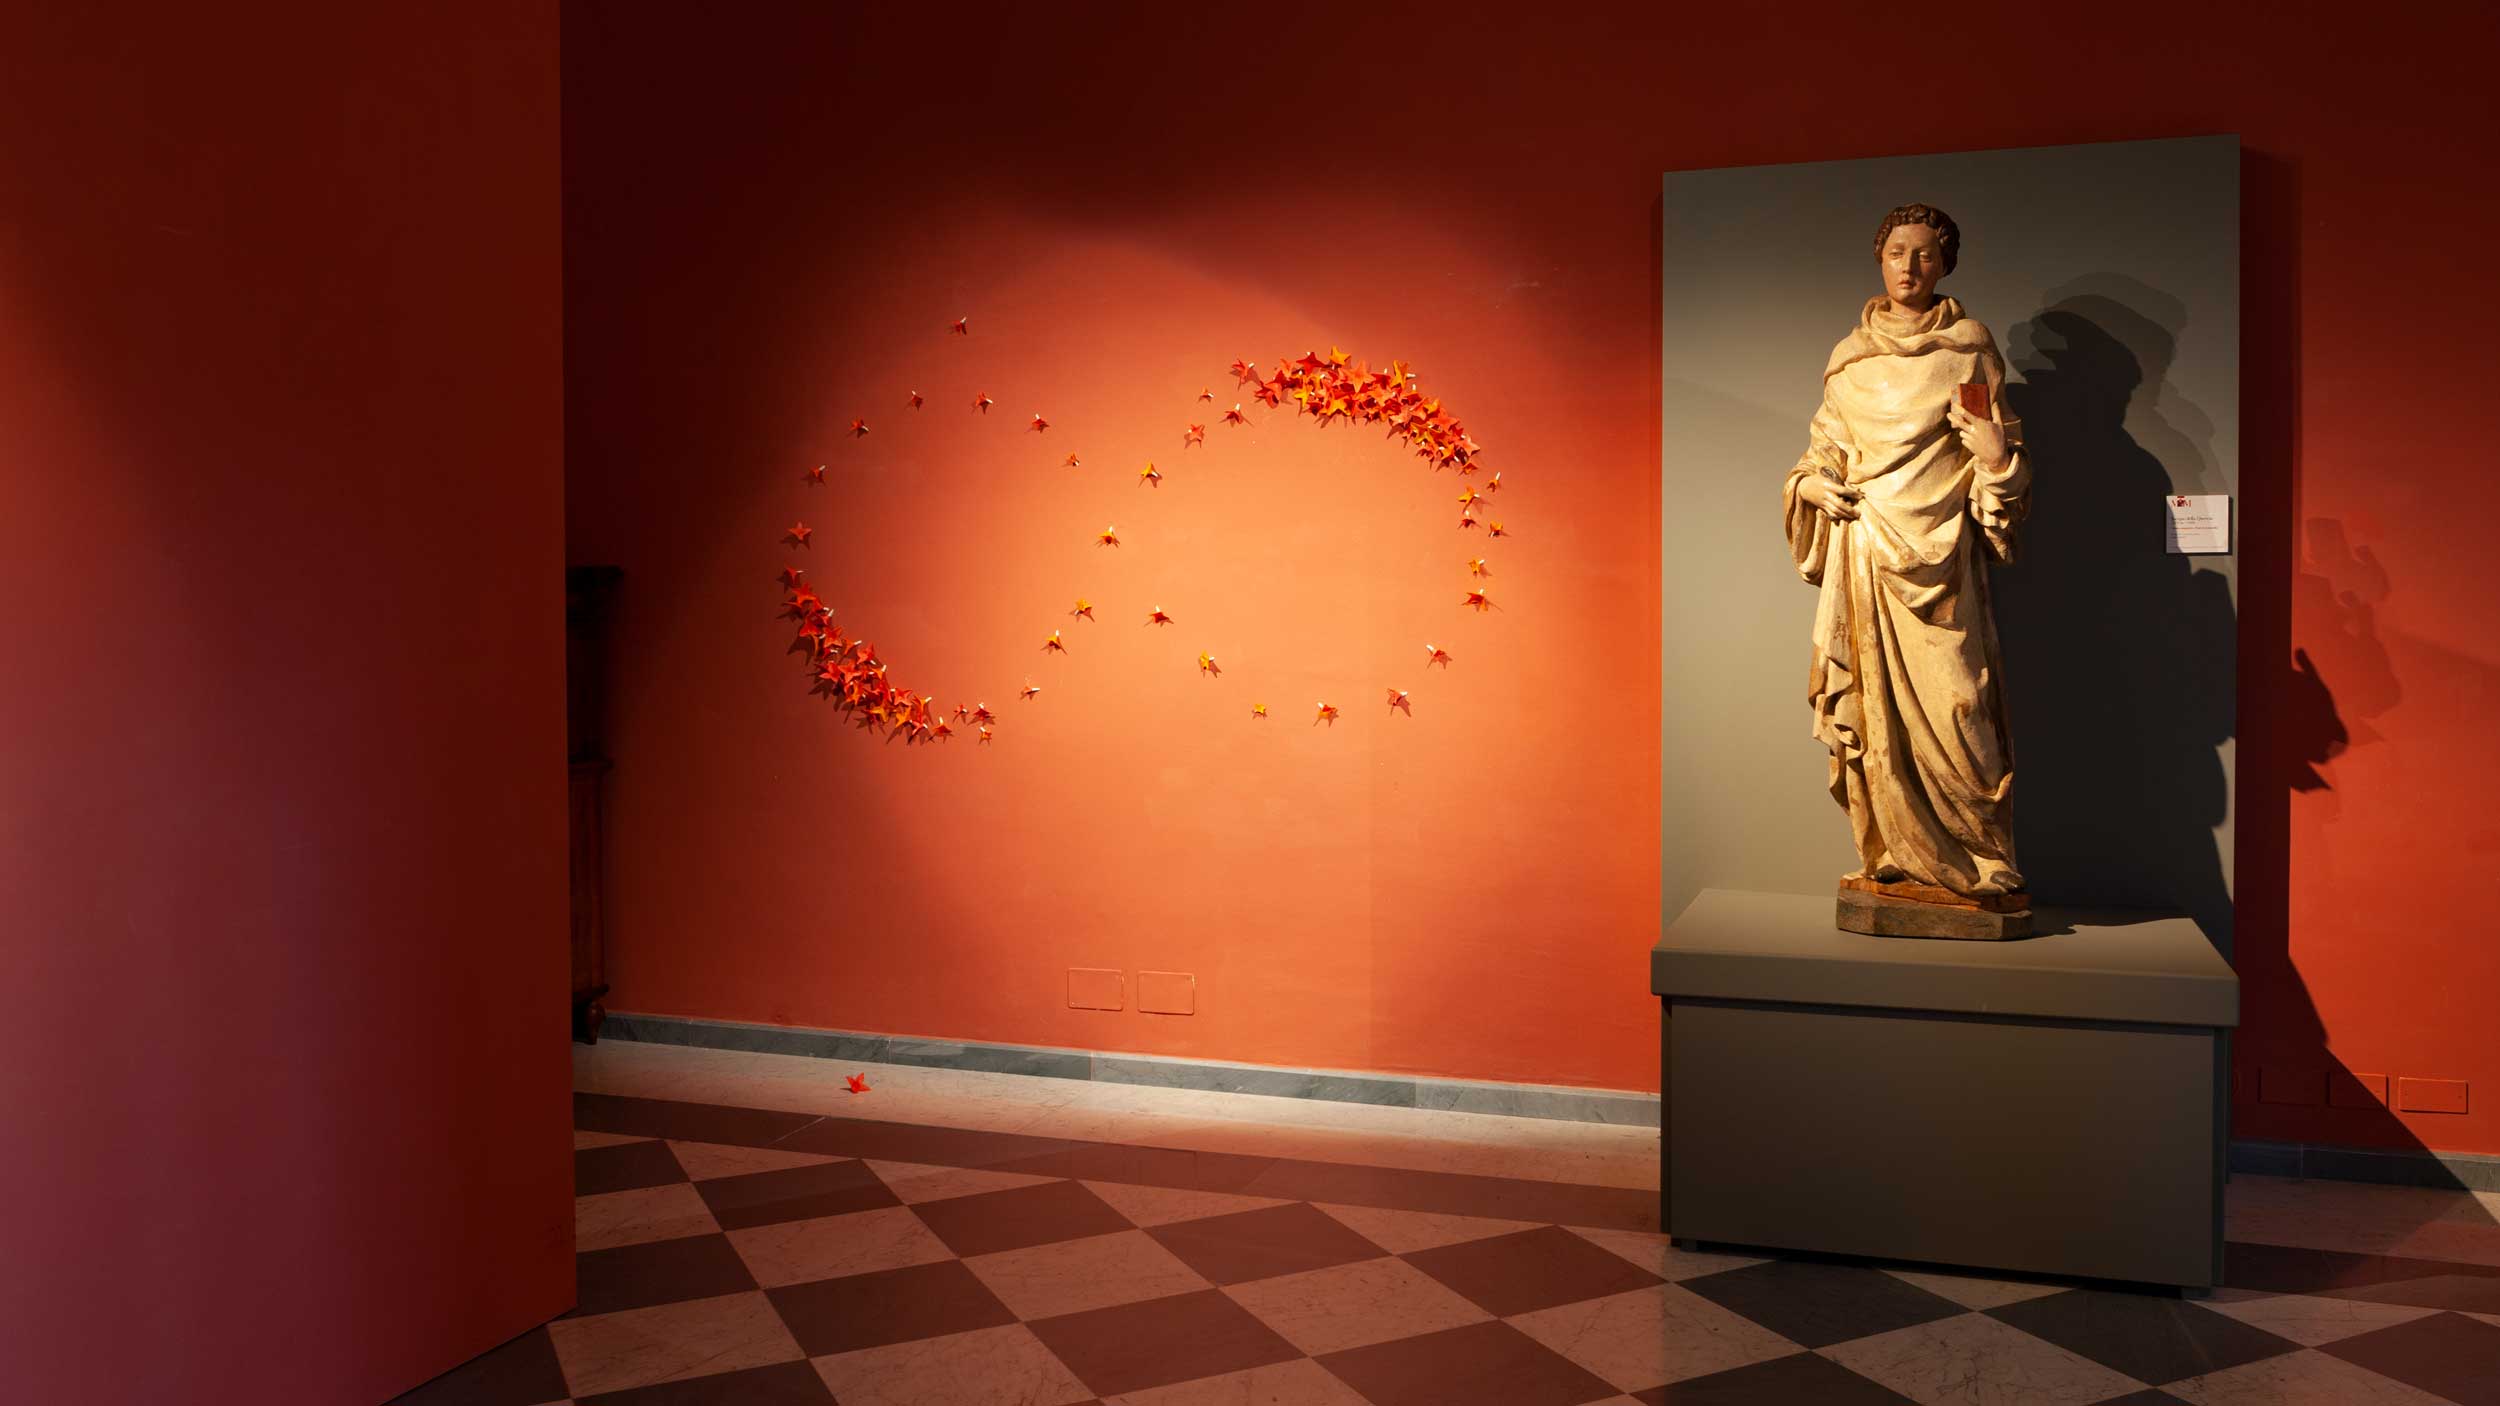 the panorama of the exhibition 2023 Diocesan Museum of Massa, installation work done by kazumasa mizokami title The infinite 2019 250x100x3,5cm plastimol on the red palete movement of the red flowers shape of the infinite. (next to it there is a sculpture with San Leonardo by Jacopo della Quercia, 1420)